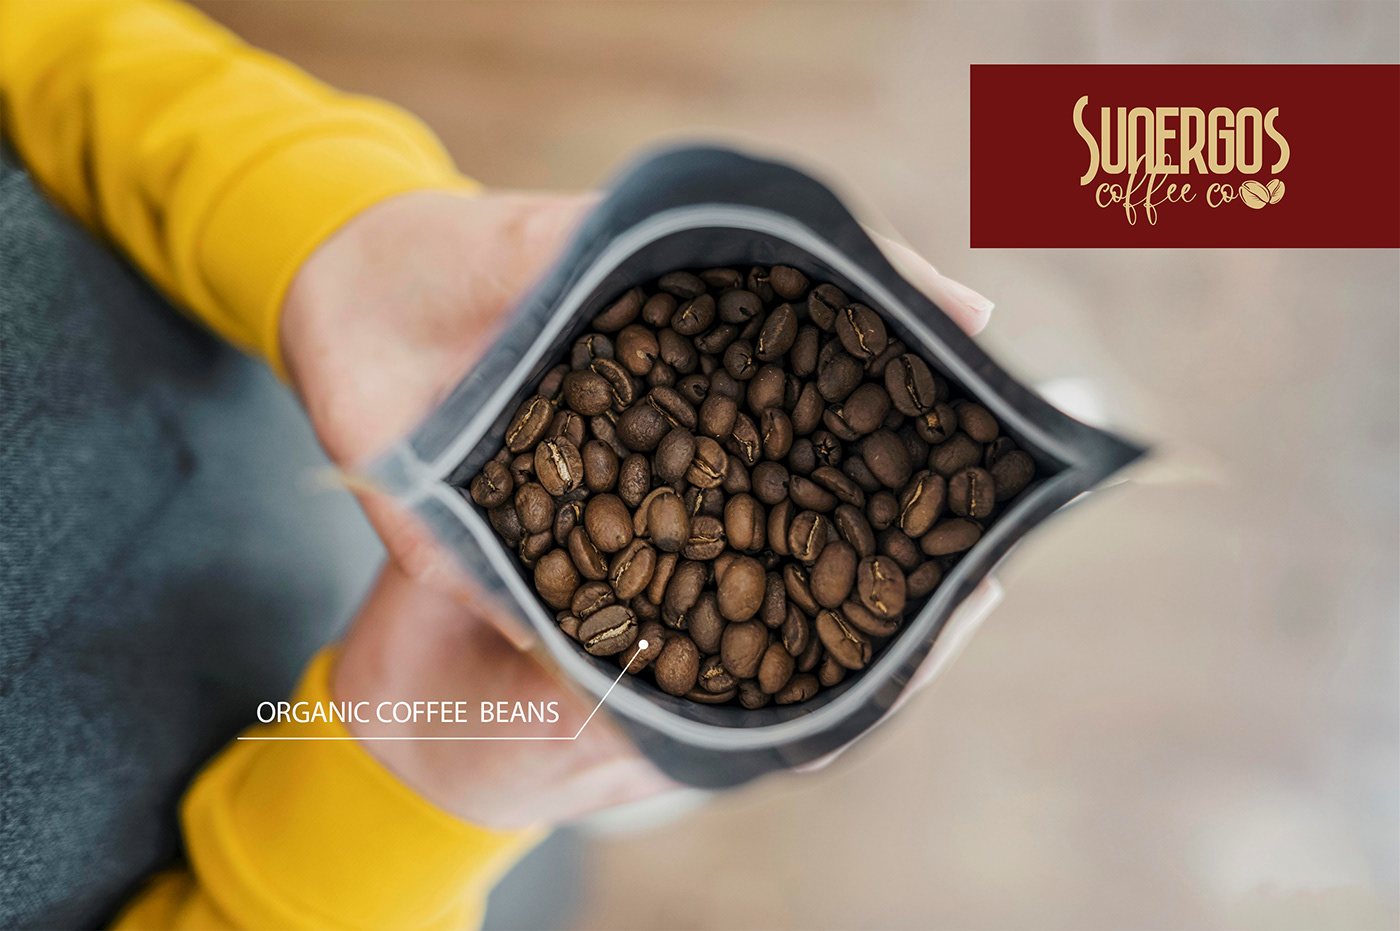 #beverages #coffee #coffee beans #company #cup #drink #mockup #Organic #package  #red  